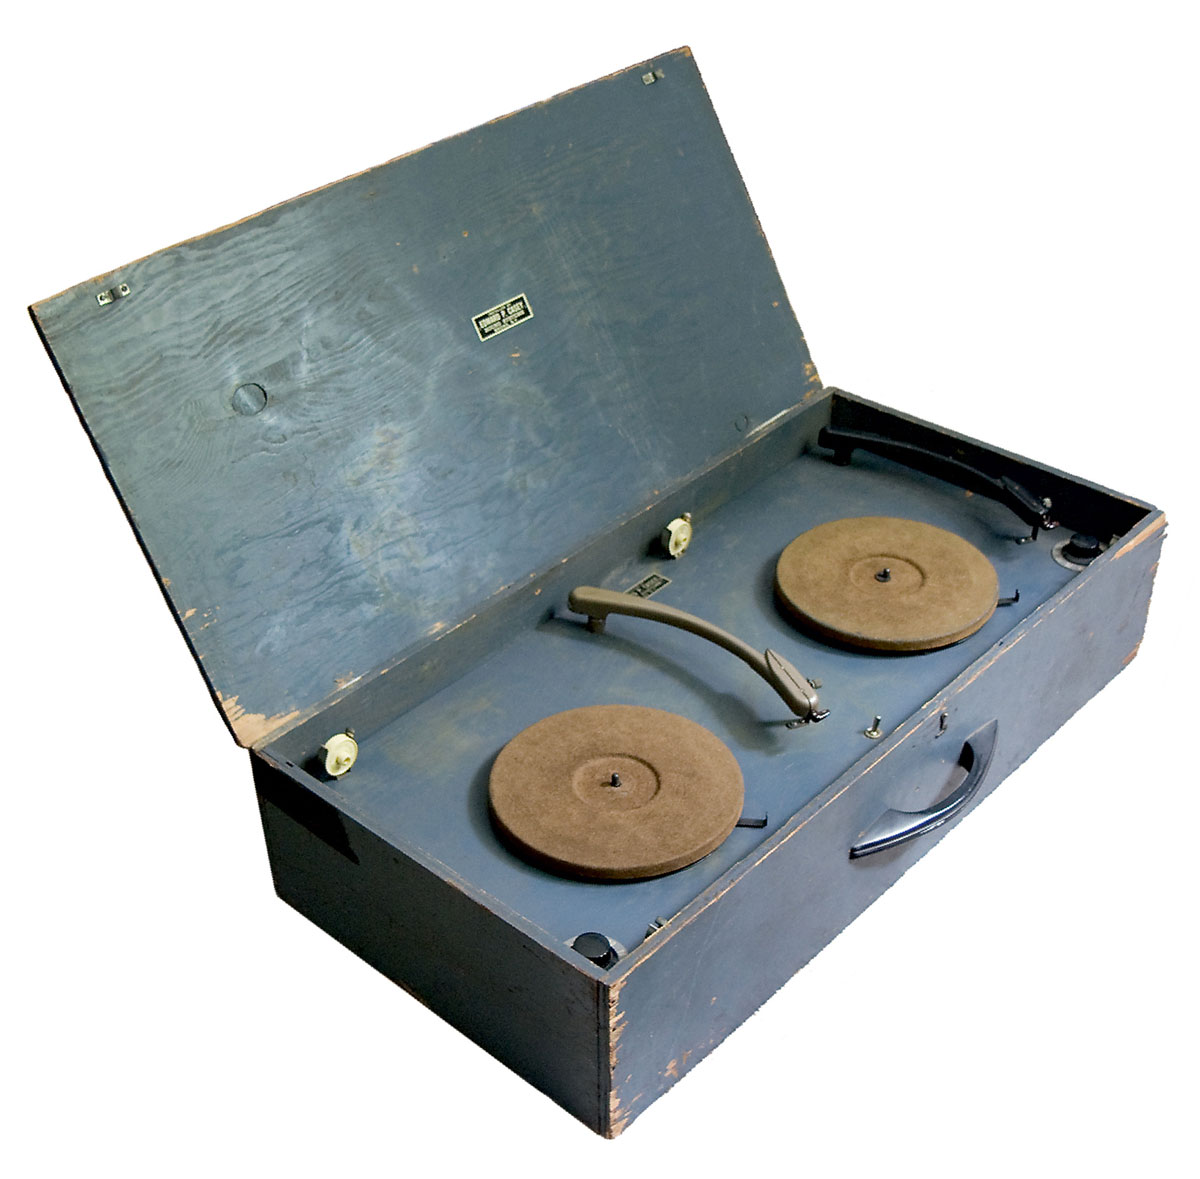 A photograph of Edward P. Casey’s 1955 custom-built double turntable for DJ’ing. 